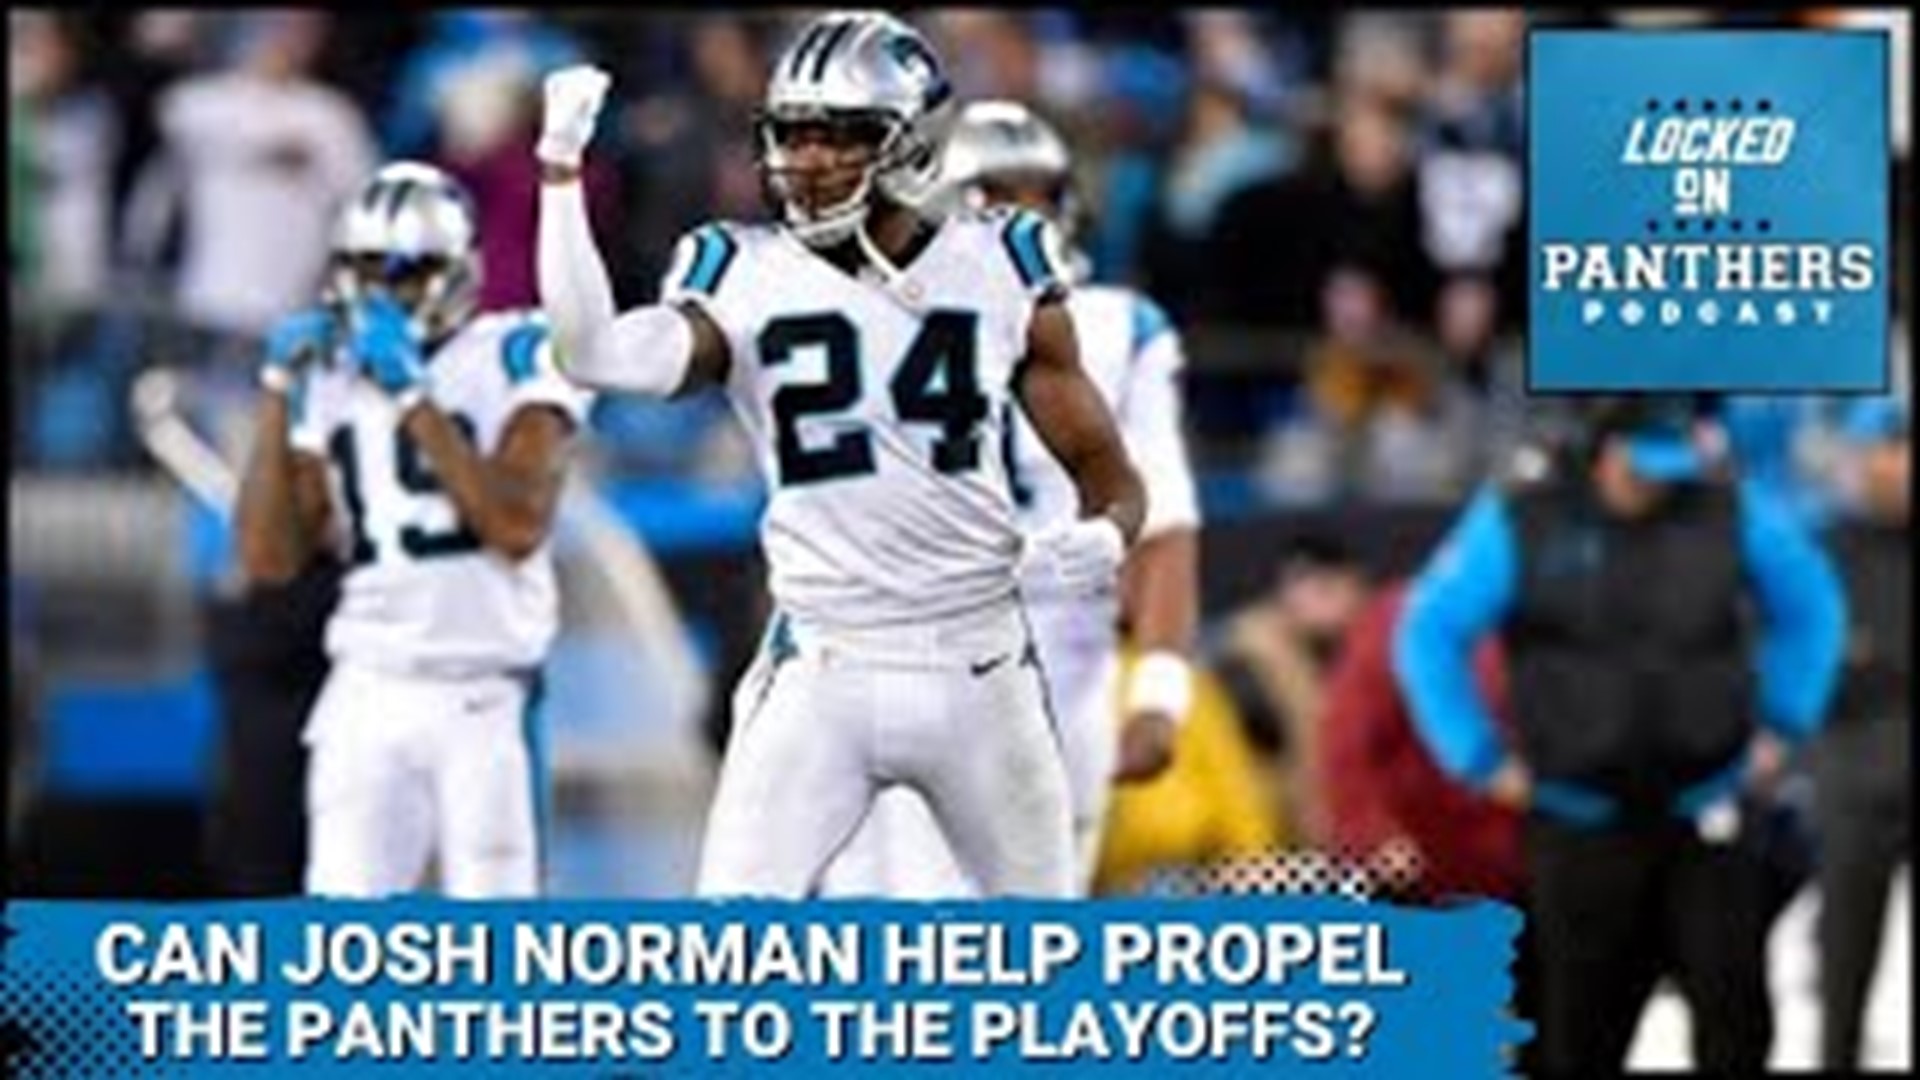 What should the realistic expectations for Norman be? Can he help propel the Panthers to the playoffs as he did in 2014? That and more on Locked On Panthers